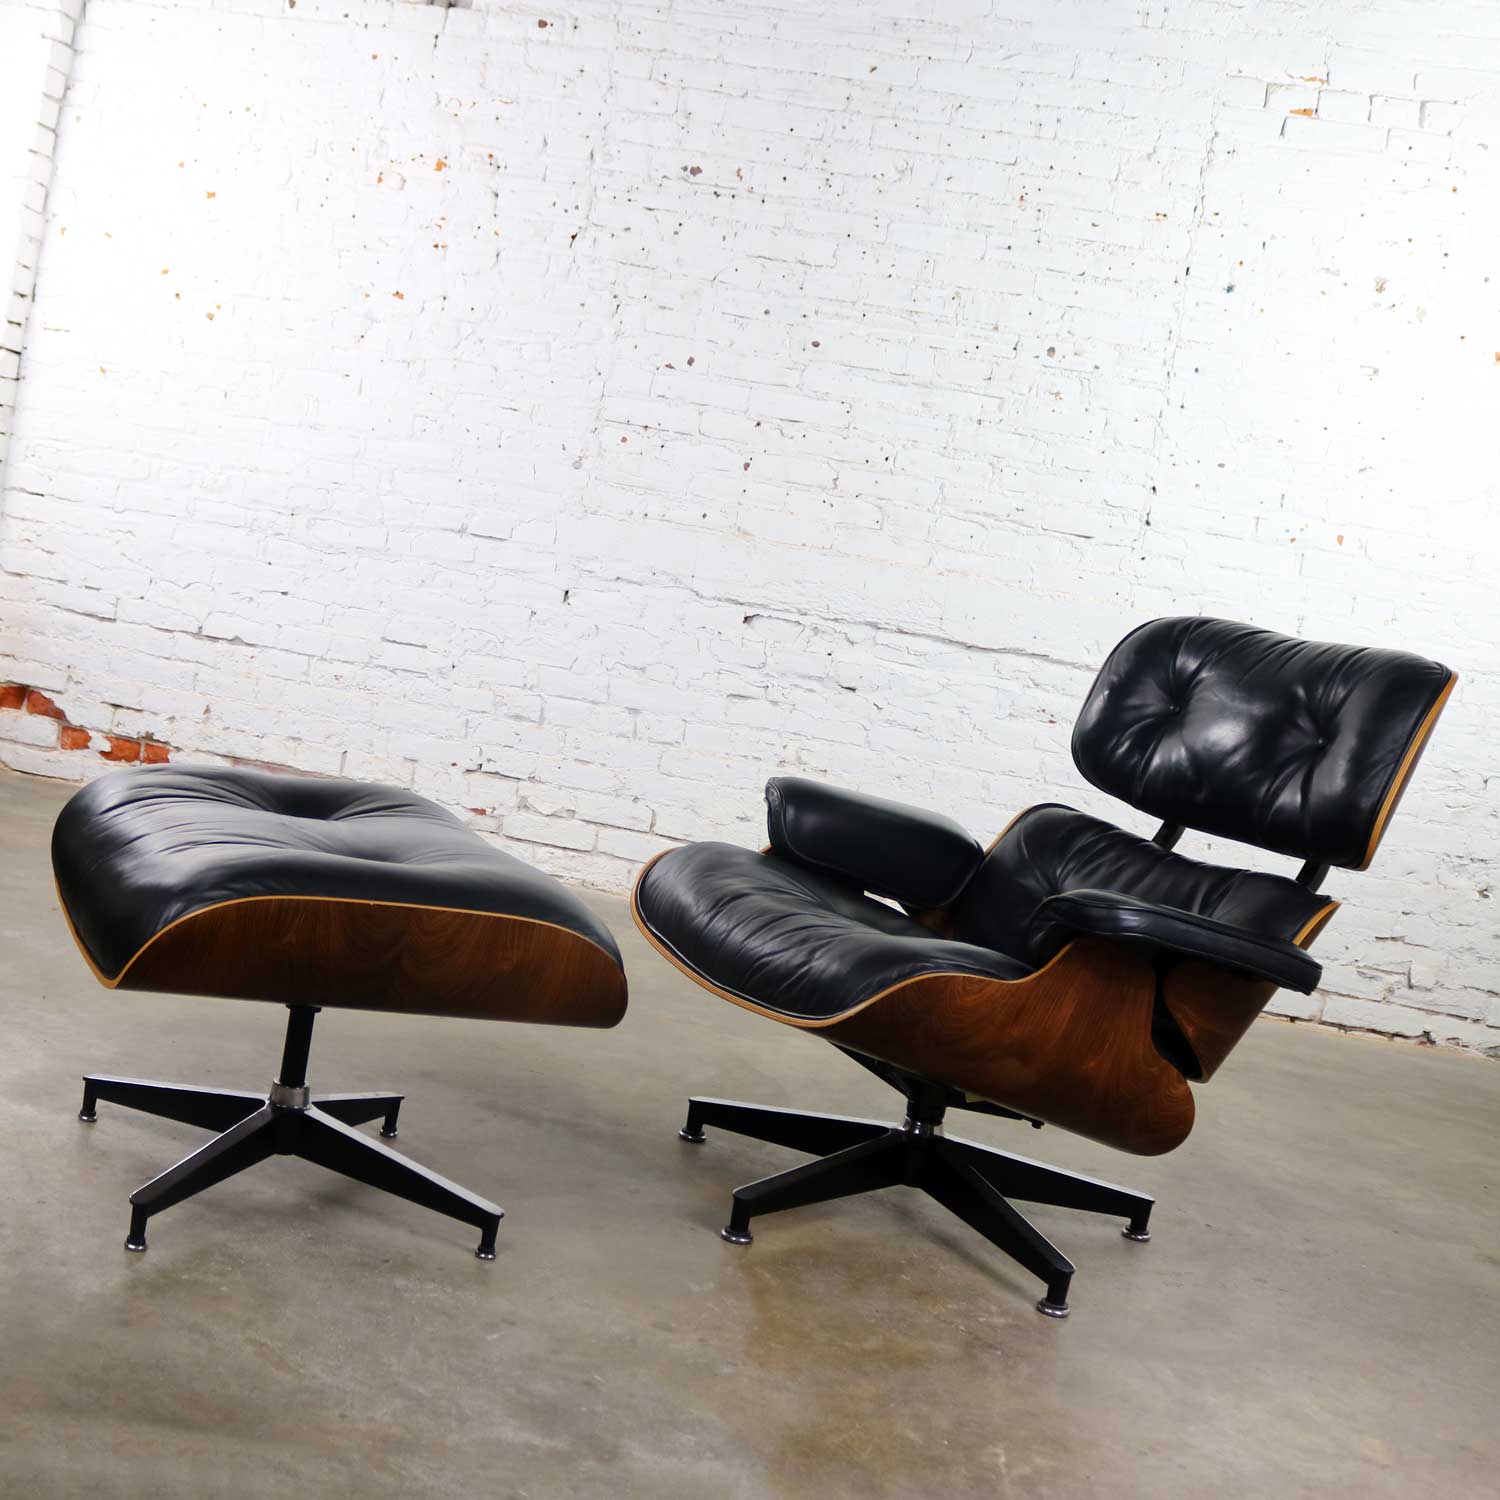 Vintage Eames Lounge Chair & Ottoman in Black Leather & Rosewood for Herman Miller